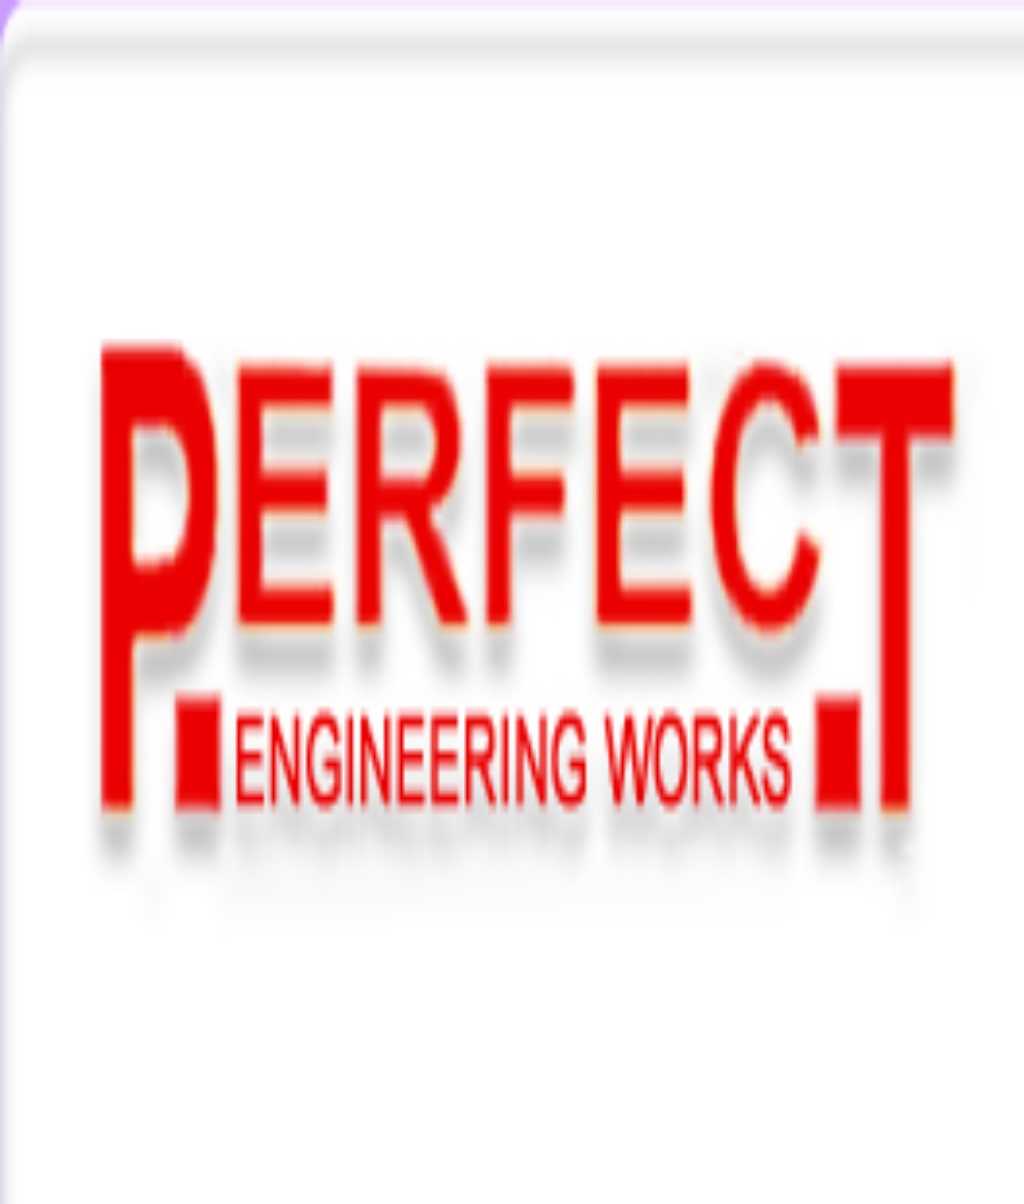 PERFECT ENGINEERING WORKS